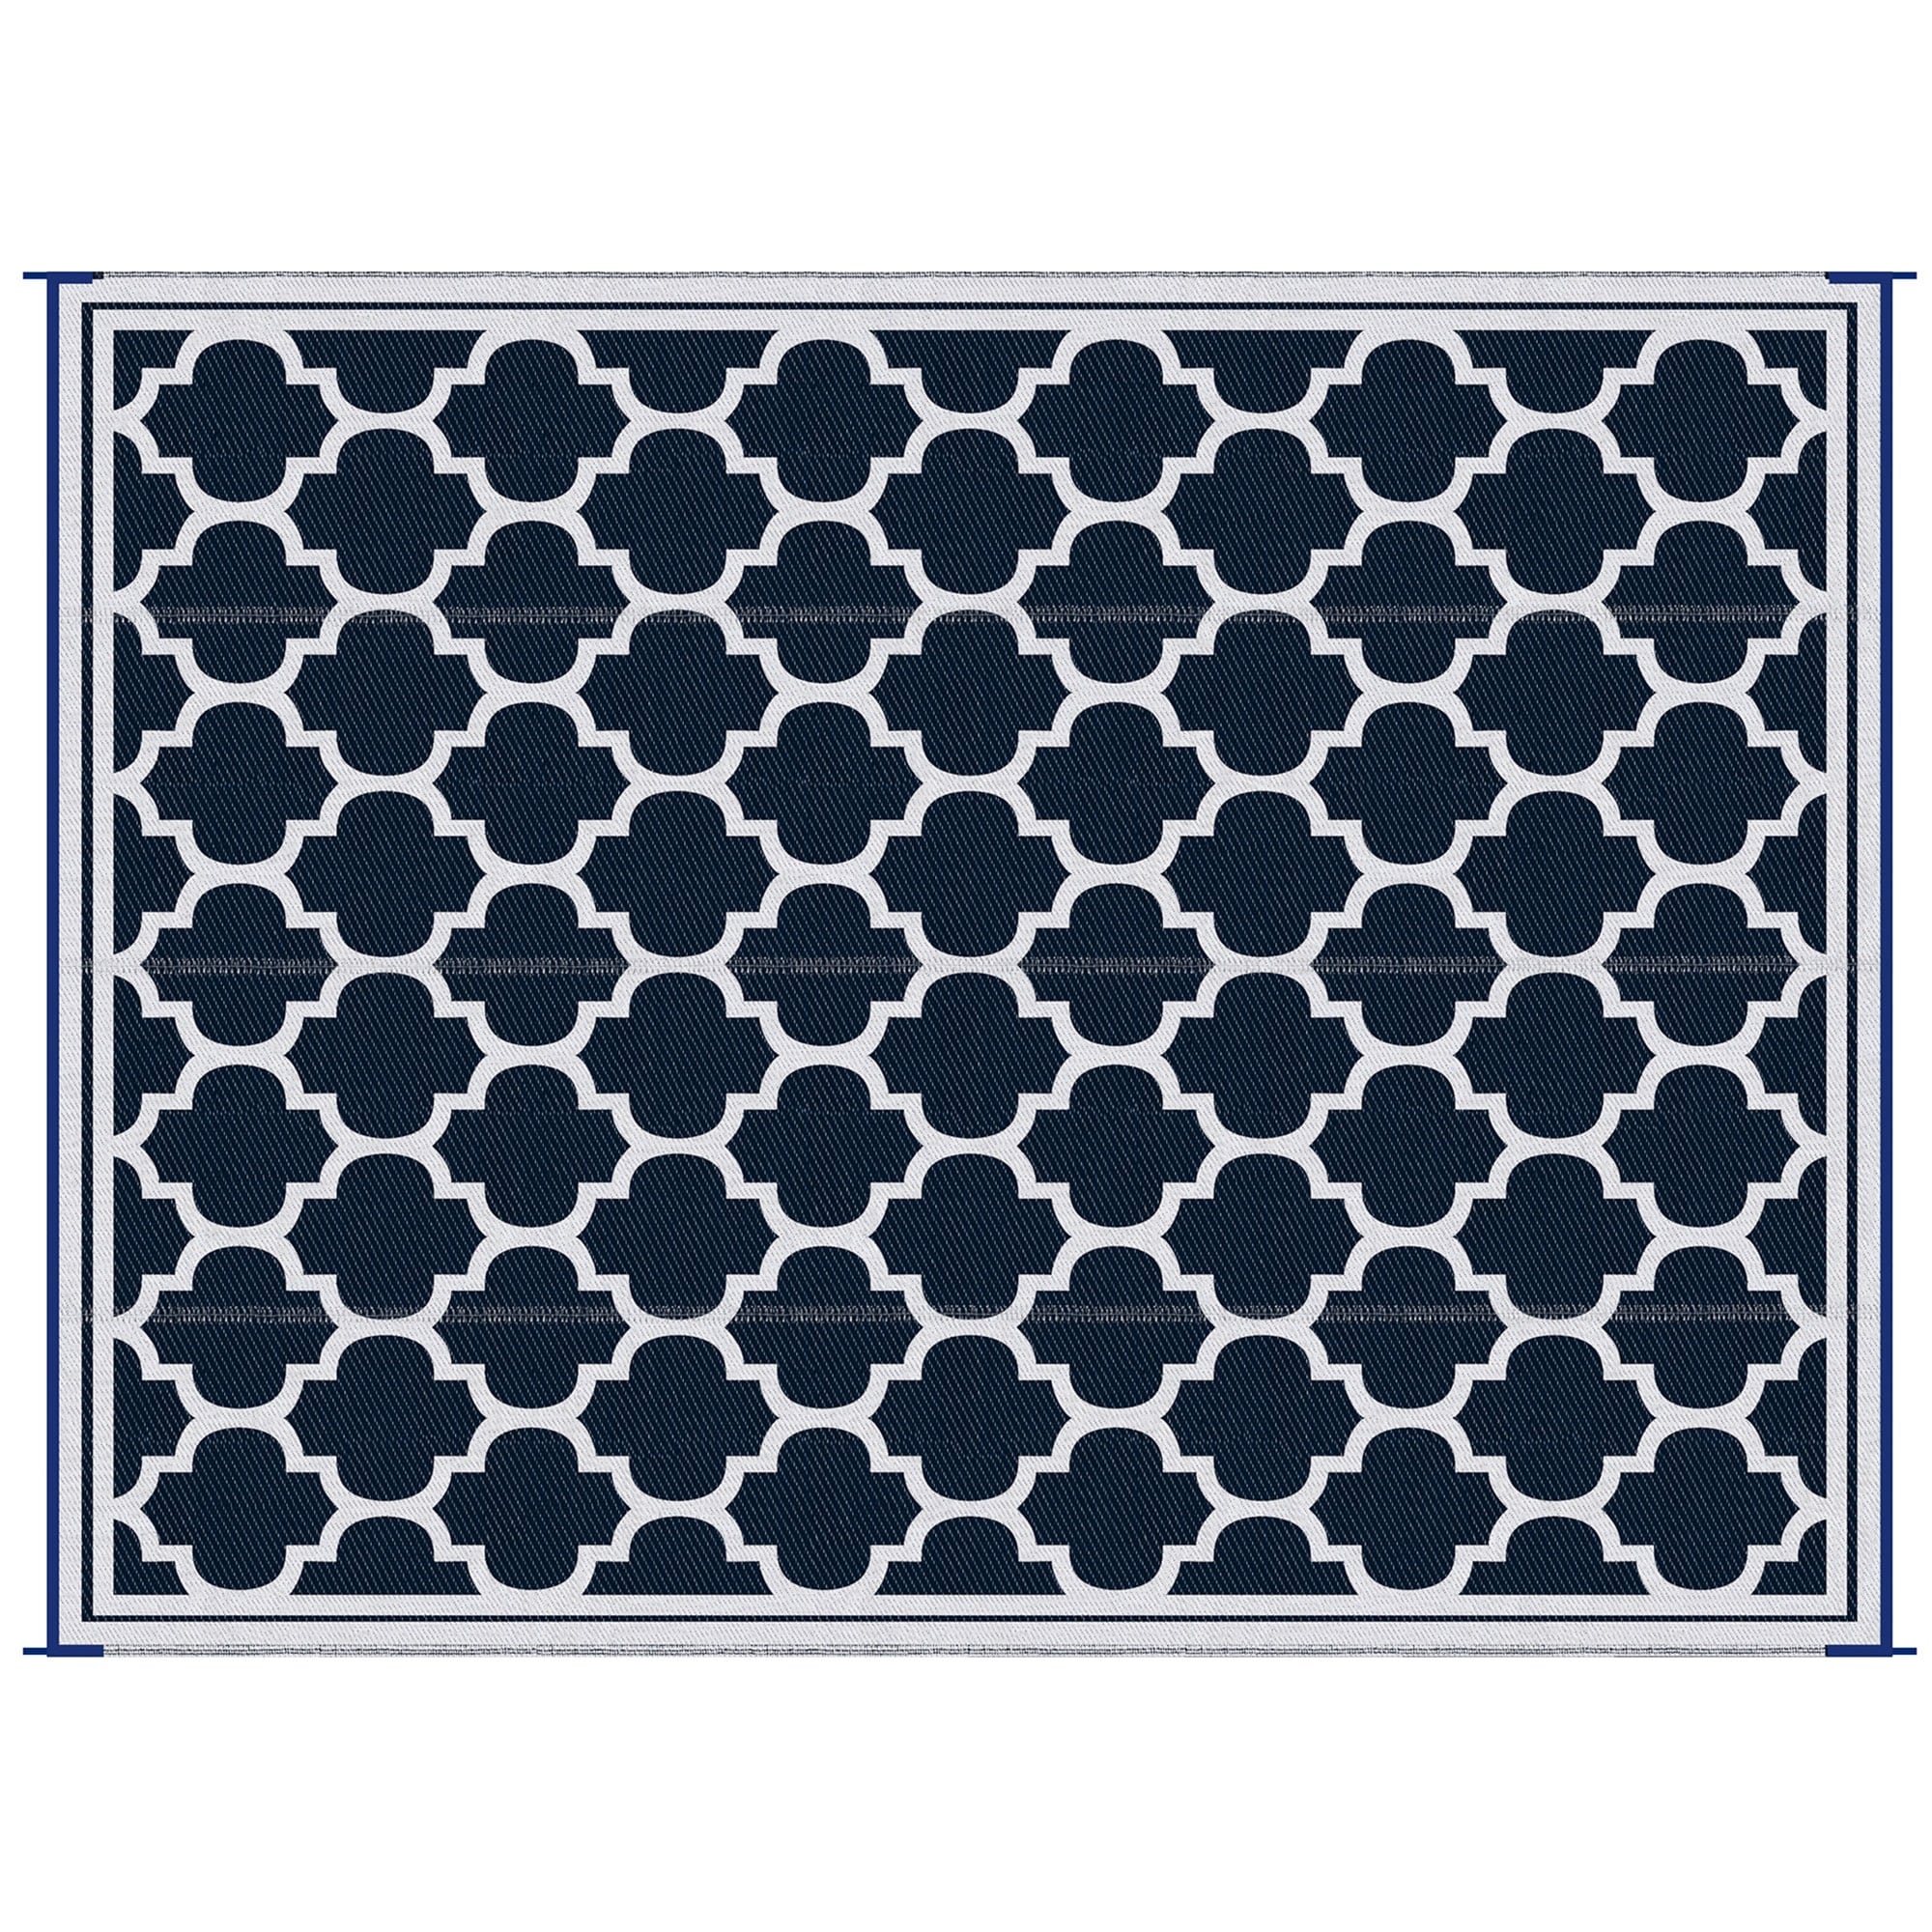 https://ak1.ostkcdn.com/images/products/is/images/direct/7db99ed27eefd4729df3601c9a7696e0c290b753/Outsunny-Reversible-Outdoor-RV-Rug%2C-Patio-Floor-Mat%2C-Plastic-Straw-Rug-for-Backyard%2C-Deck%2C-Picnic%2C-Beach%2C-Camping.jpg